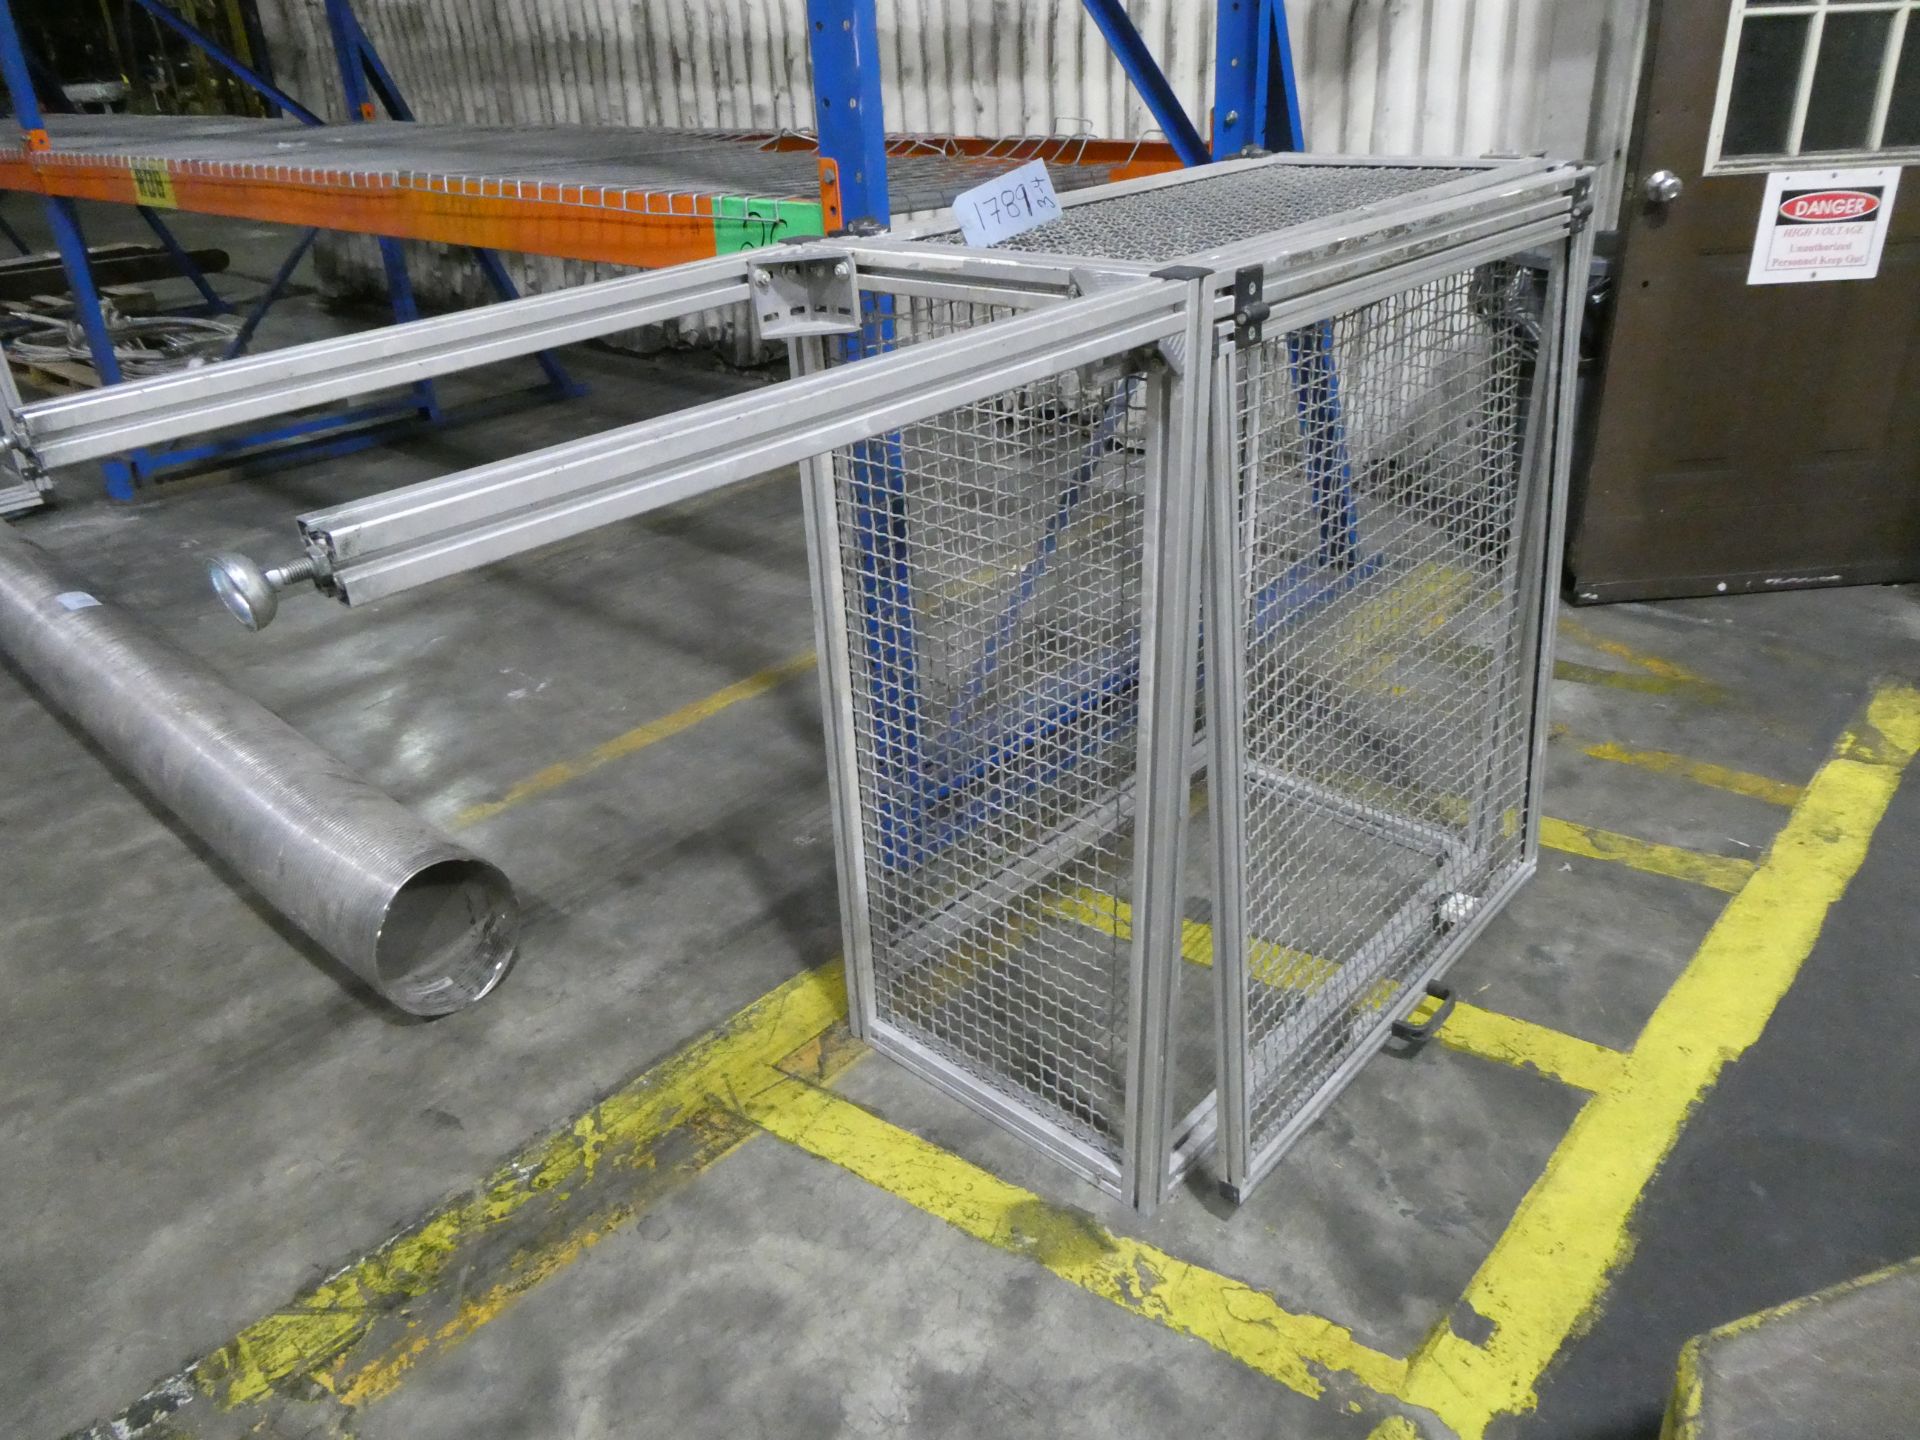 Aluminum Safety Cages, 8020 - Image 4 of 4